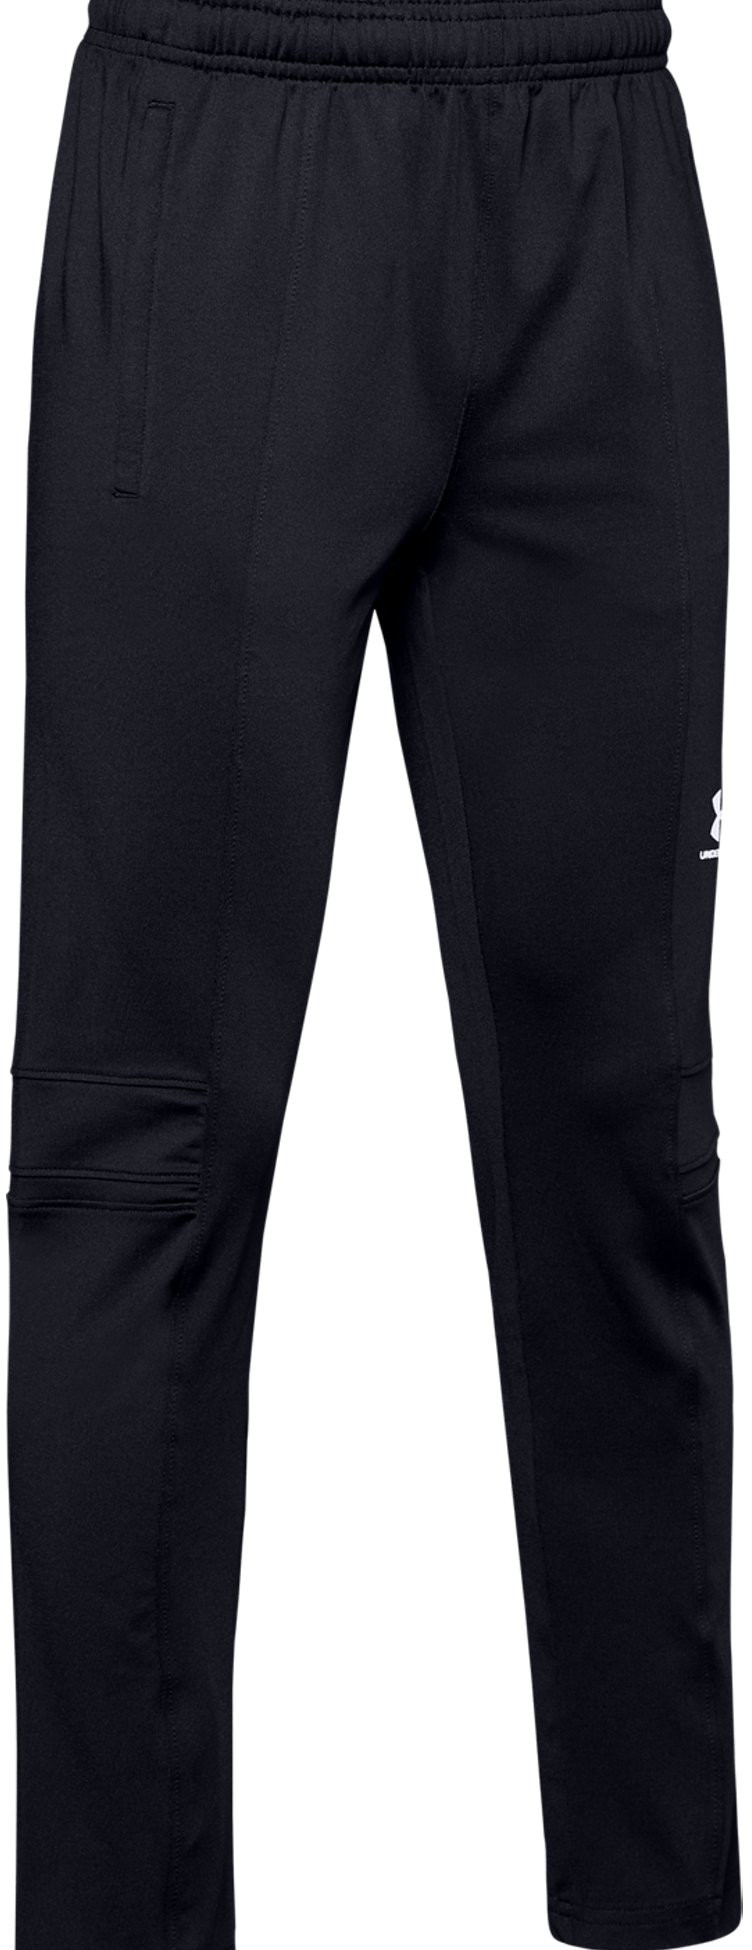  Under Armour Y Challenger III Train Pant